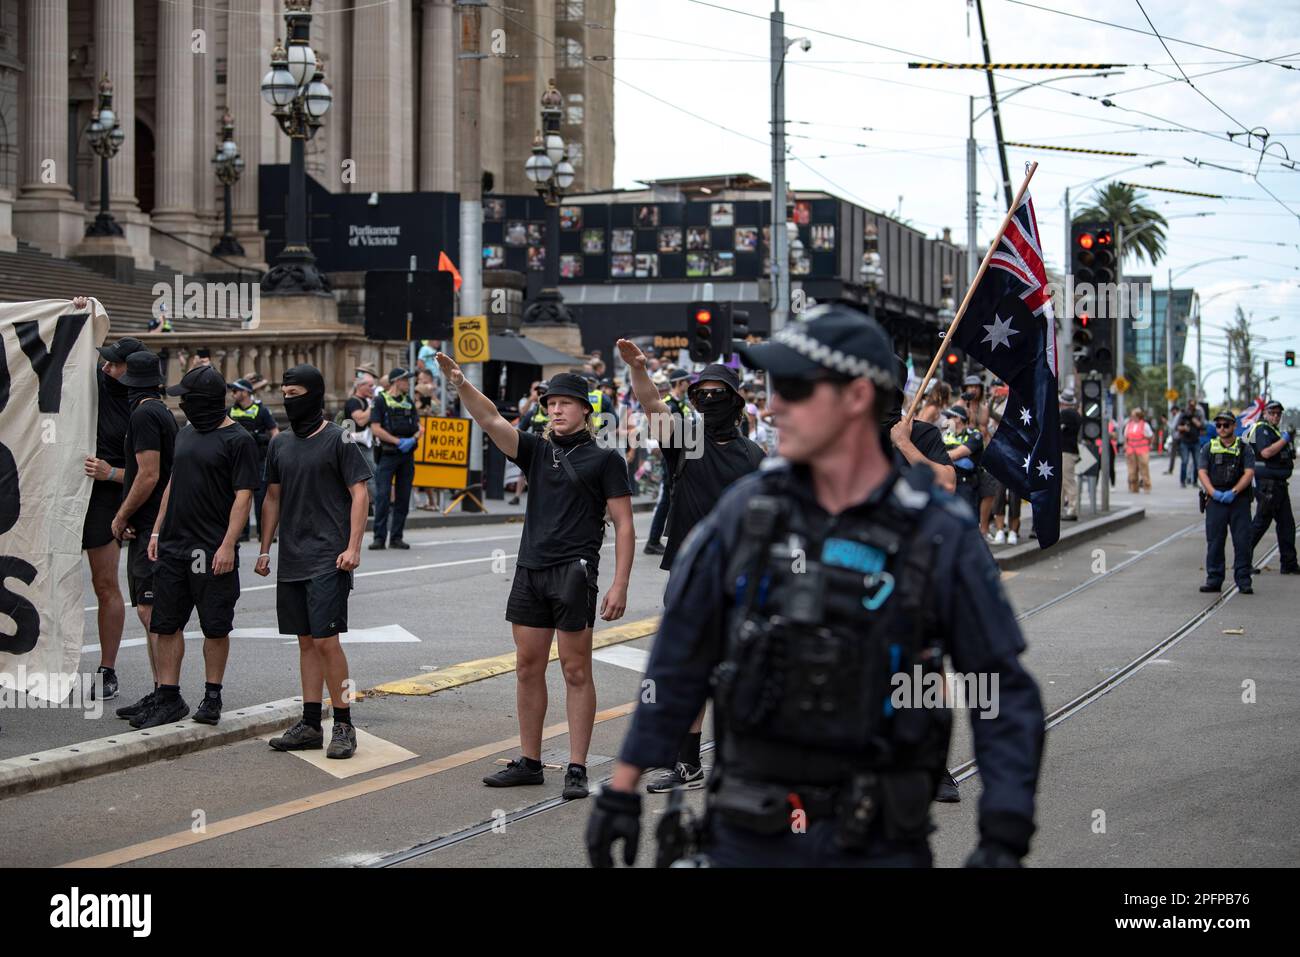 Melbourne, Australia, March 18th 2023. With no interference from police, neo-nazis freely salute at counter-protesters at a Trans Exclusionary Radical Feminist (TERF) rally, where feminists discredit non-conforming gender identities, specifically transgender women. Credit: Jay Kogler/Alamy Live News Stock Photo